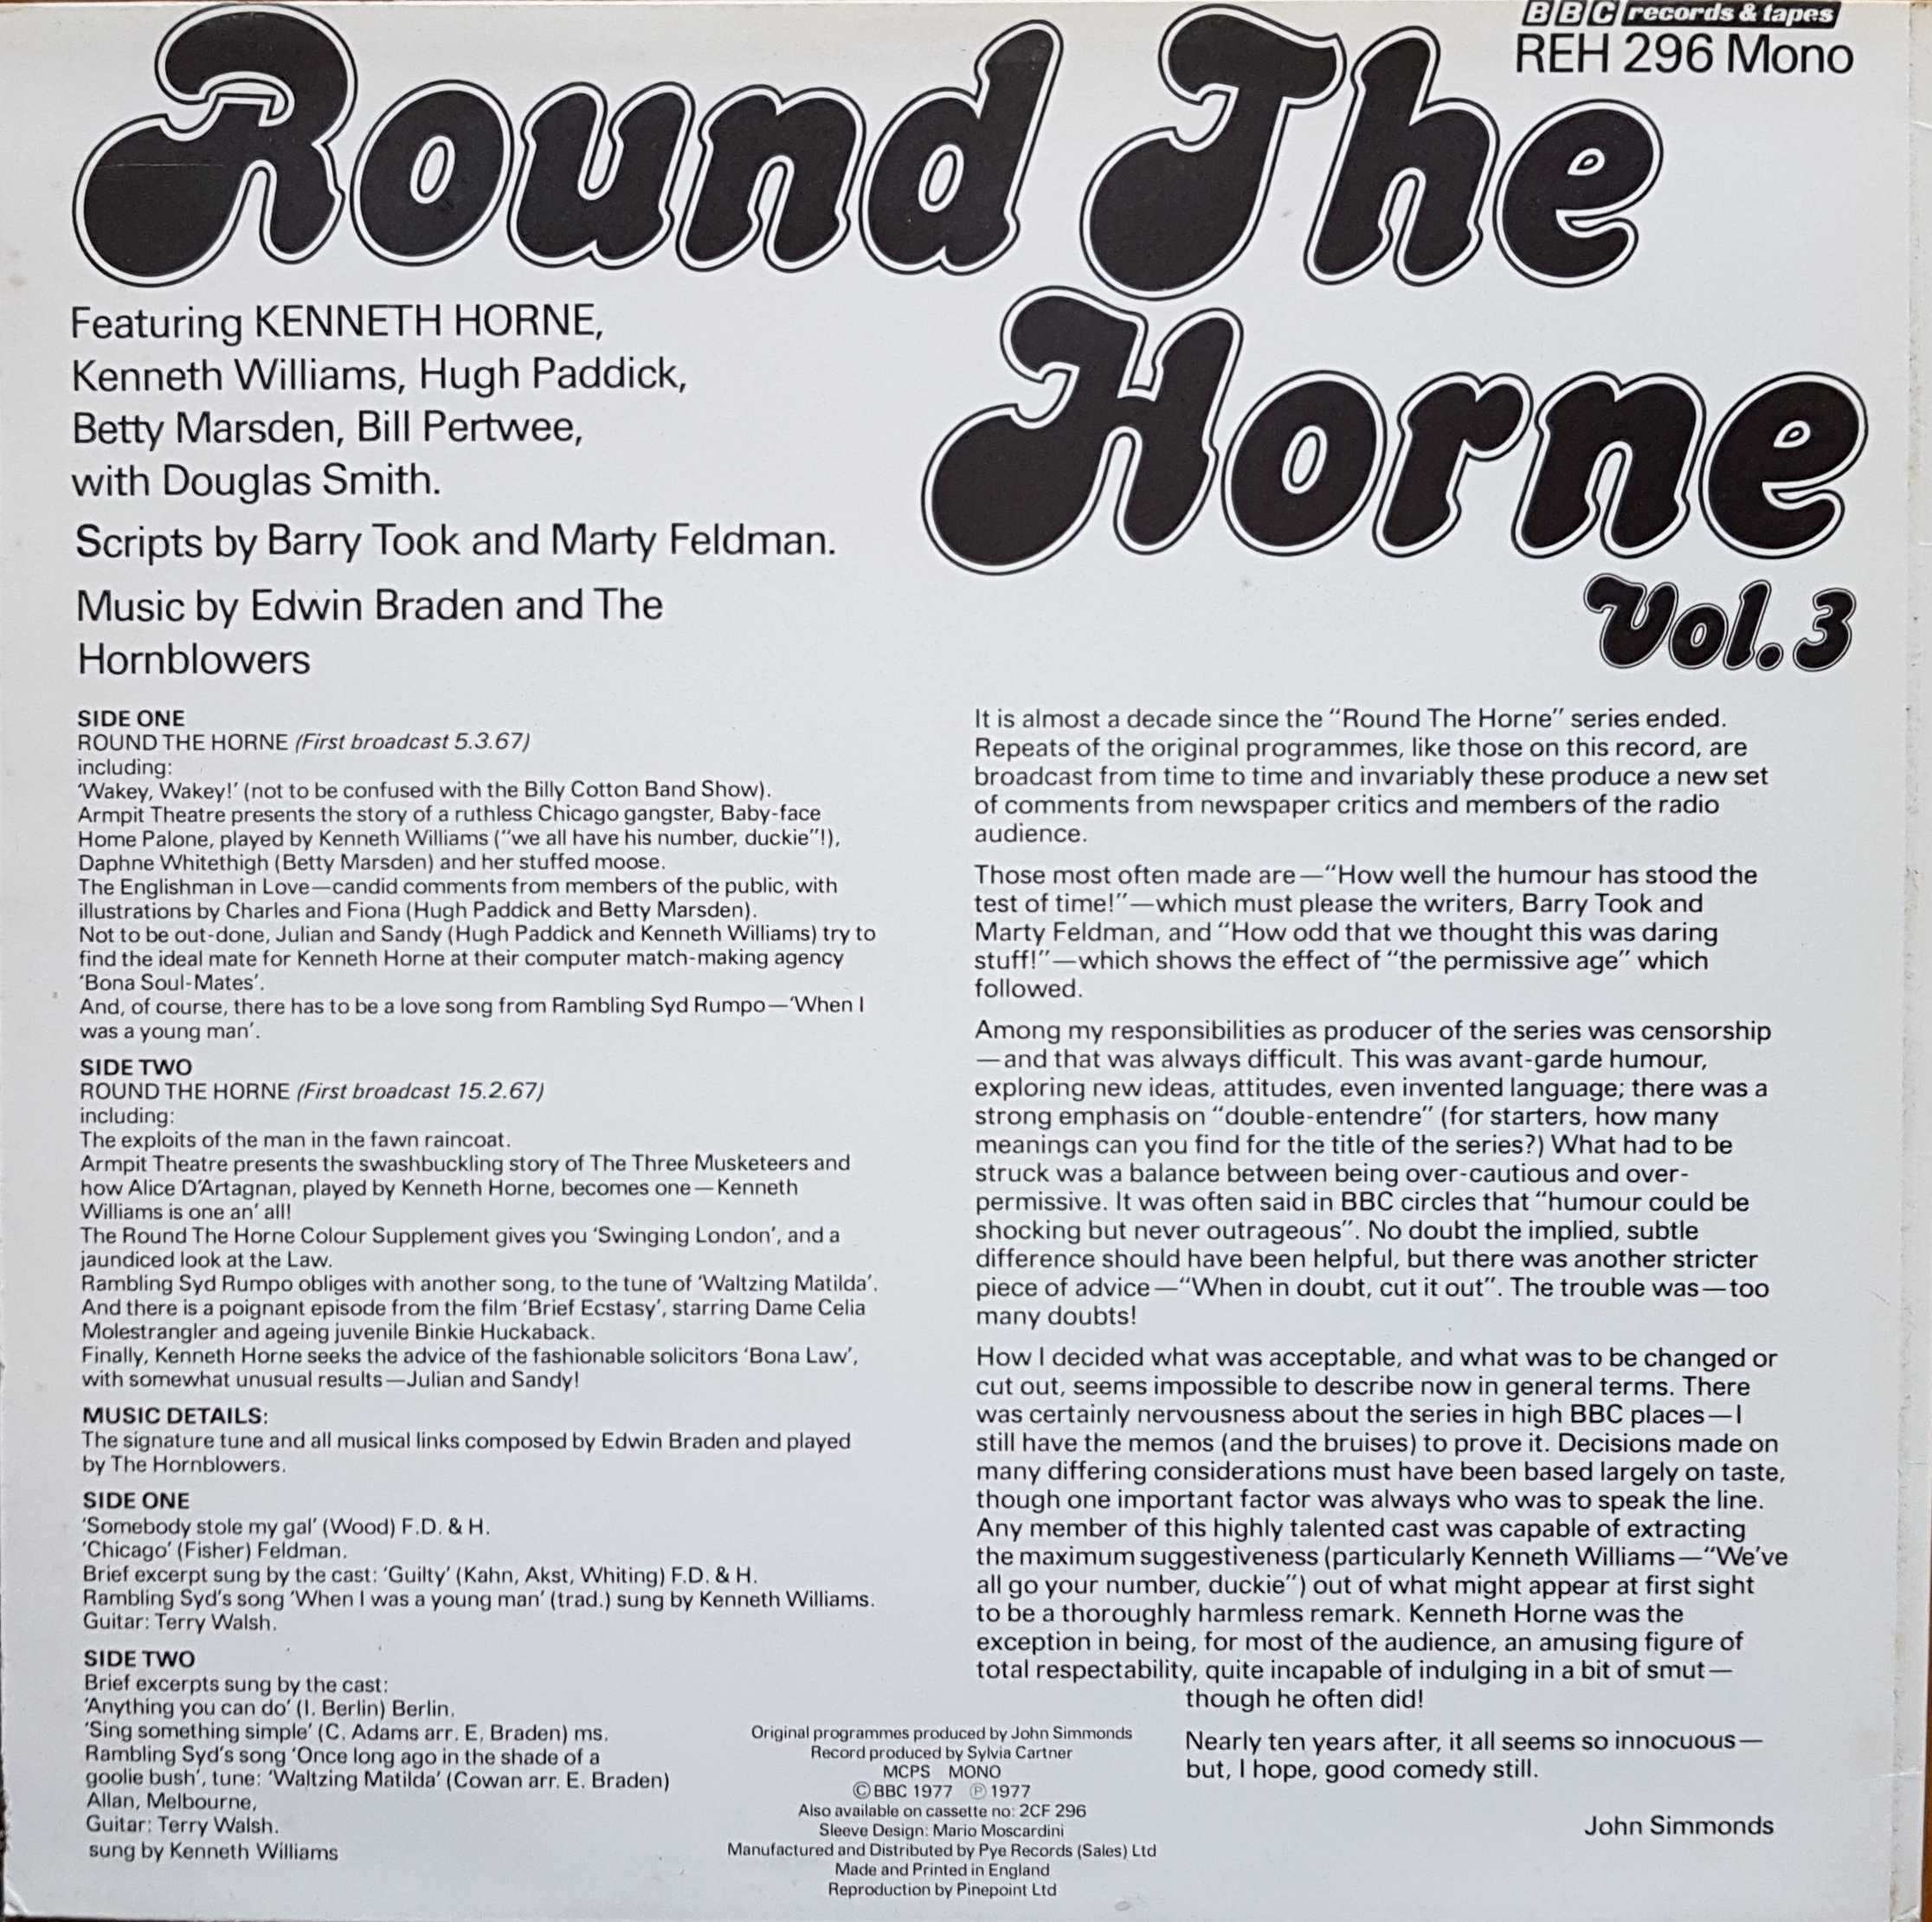 Picture of REH 296 Round the Horne - Volume 3 by artist Barry Took / Marty Feldman from the BBC records and Tapes library